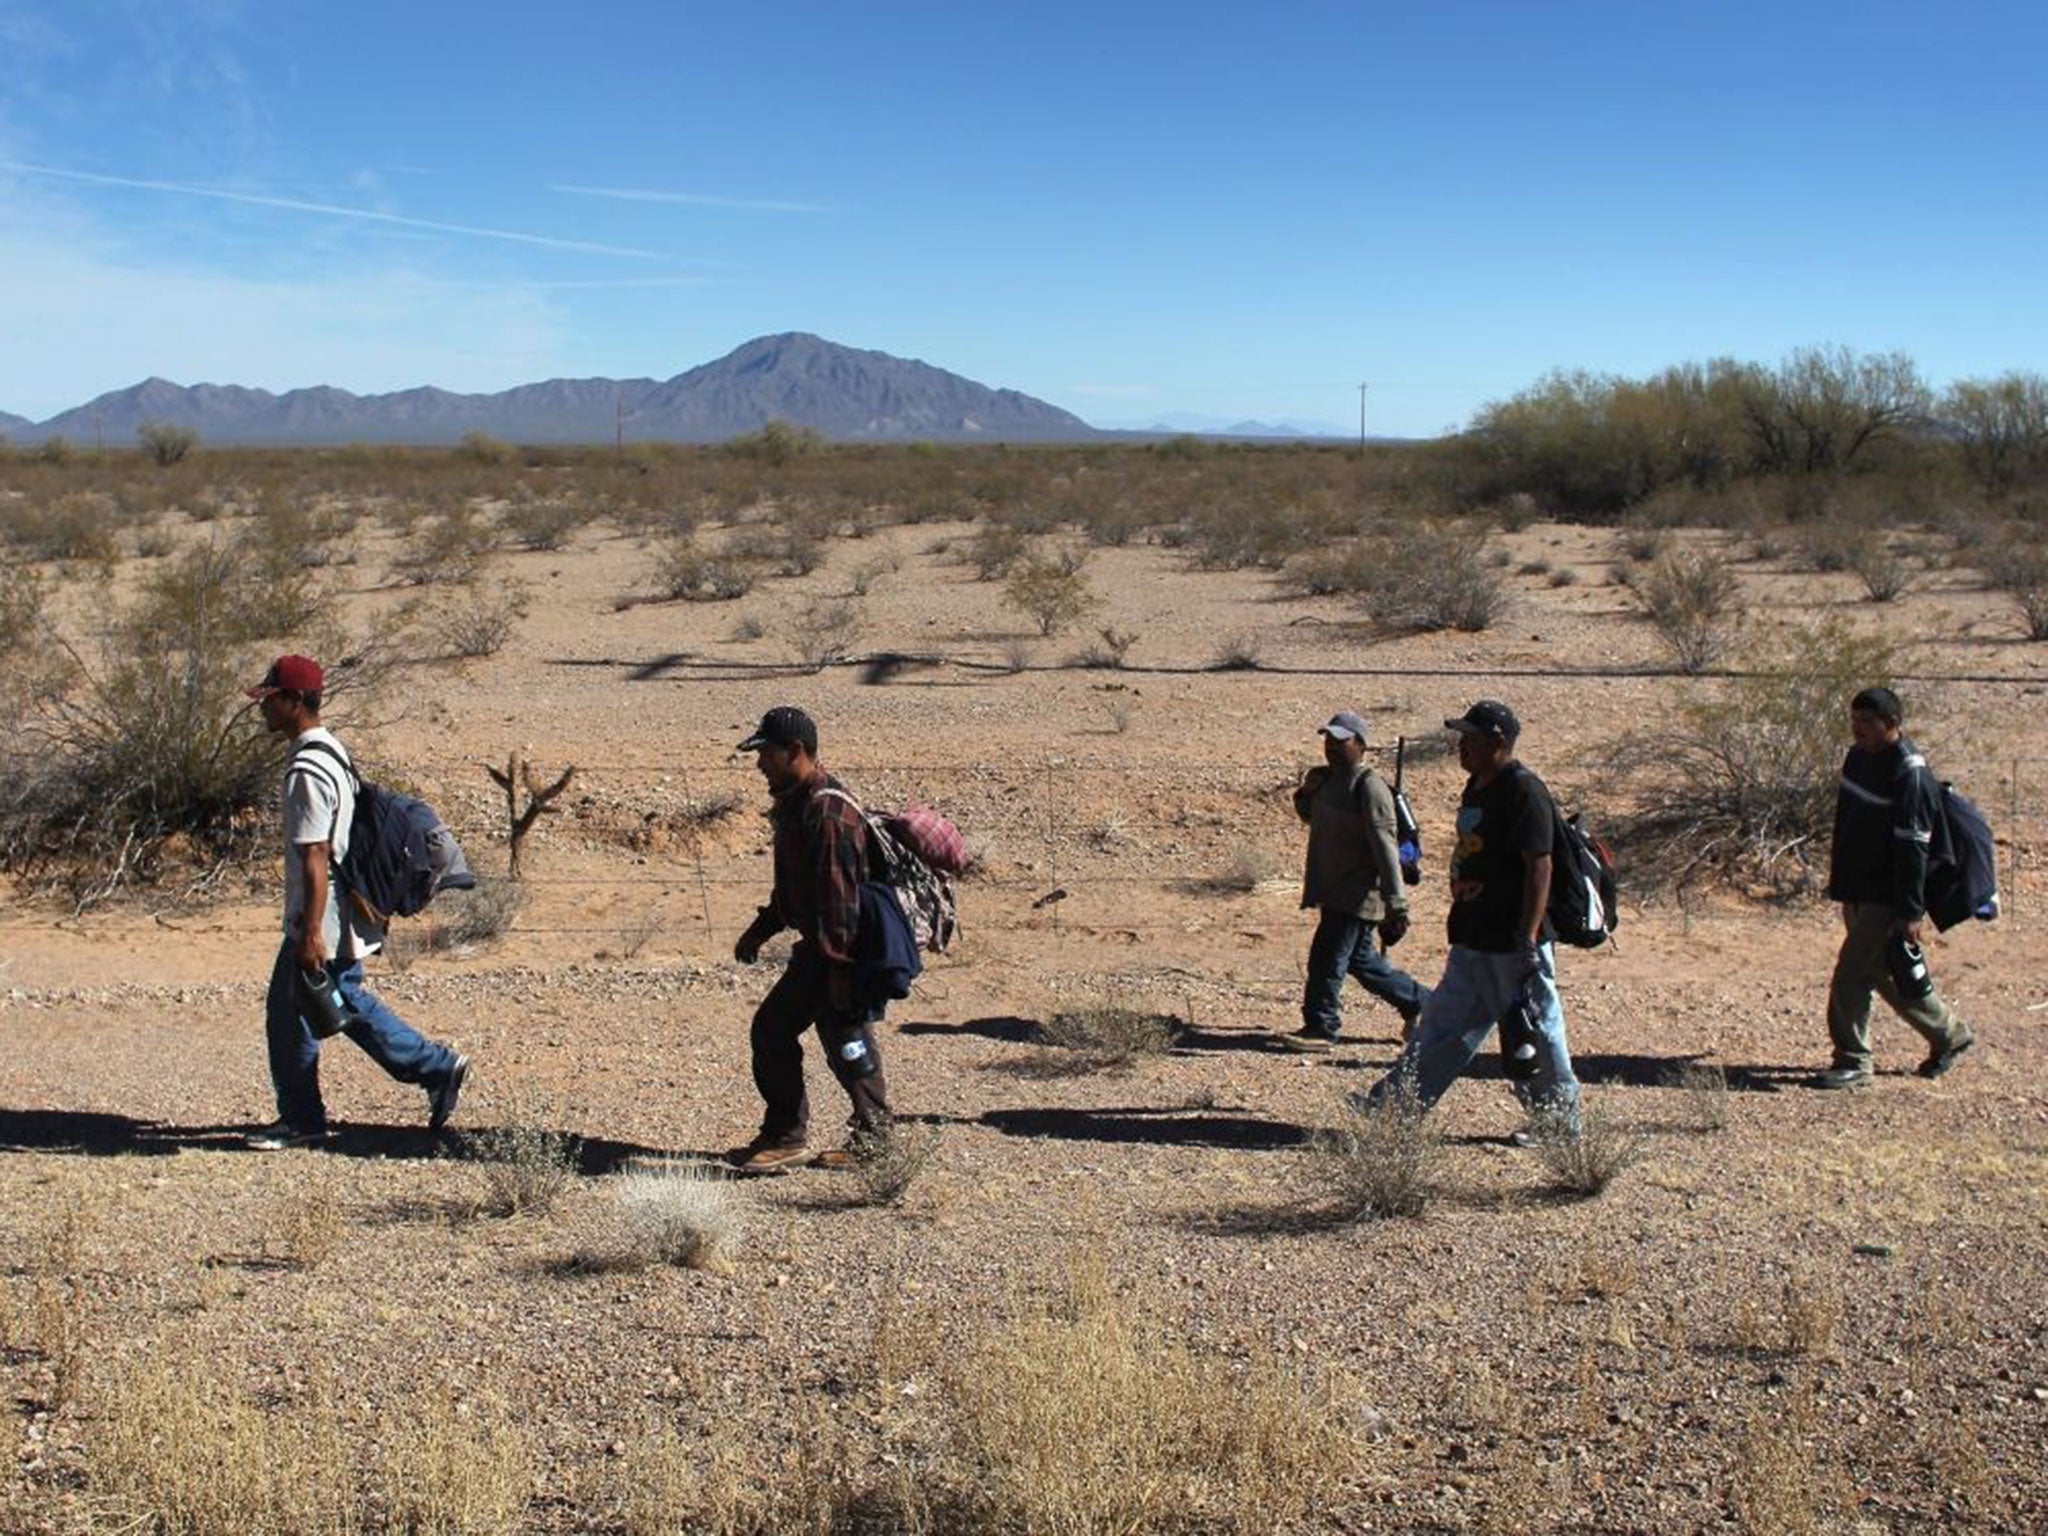 In the heat of the day: Illegal migrants walk through the Sonoran Desert after crossing into the US